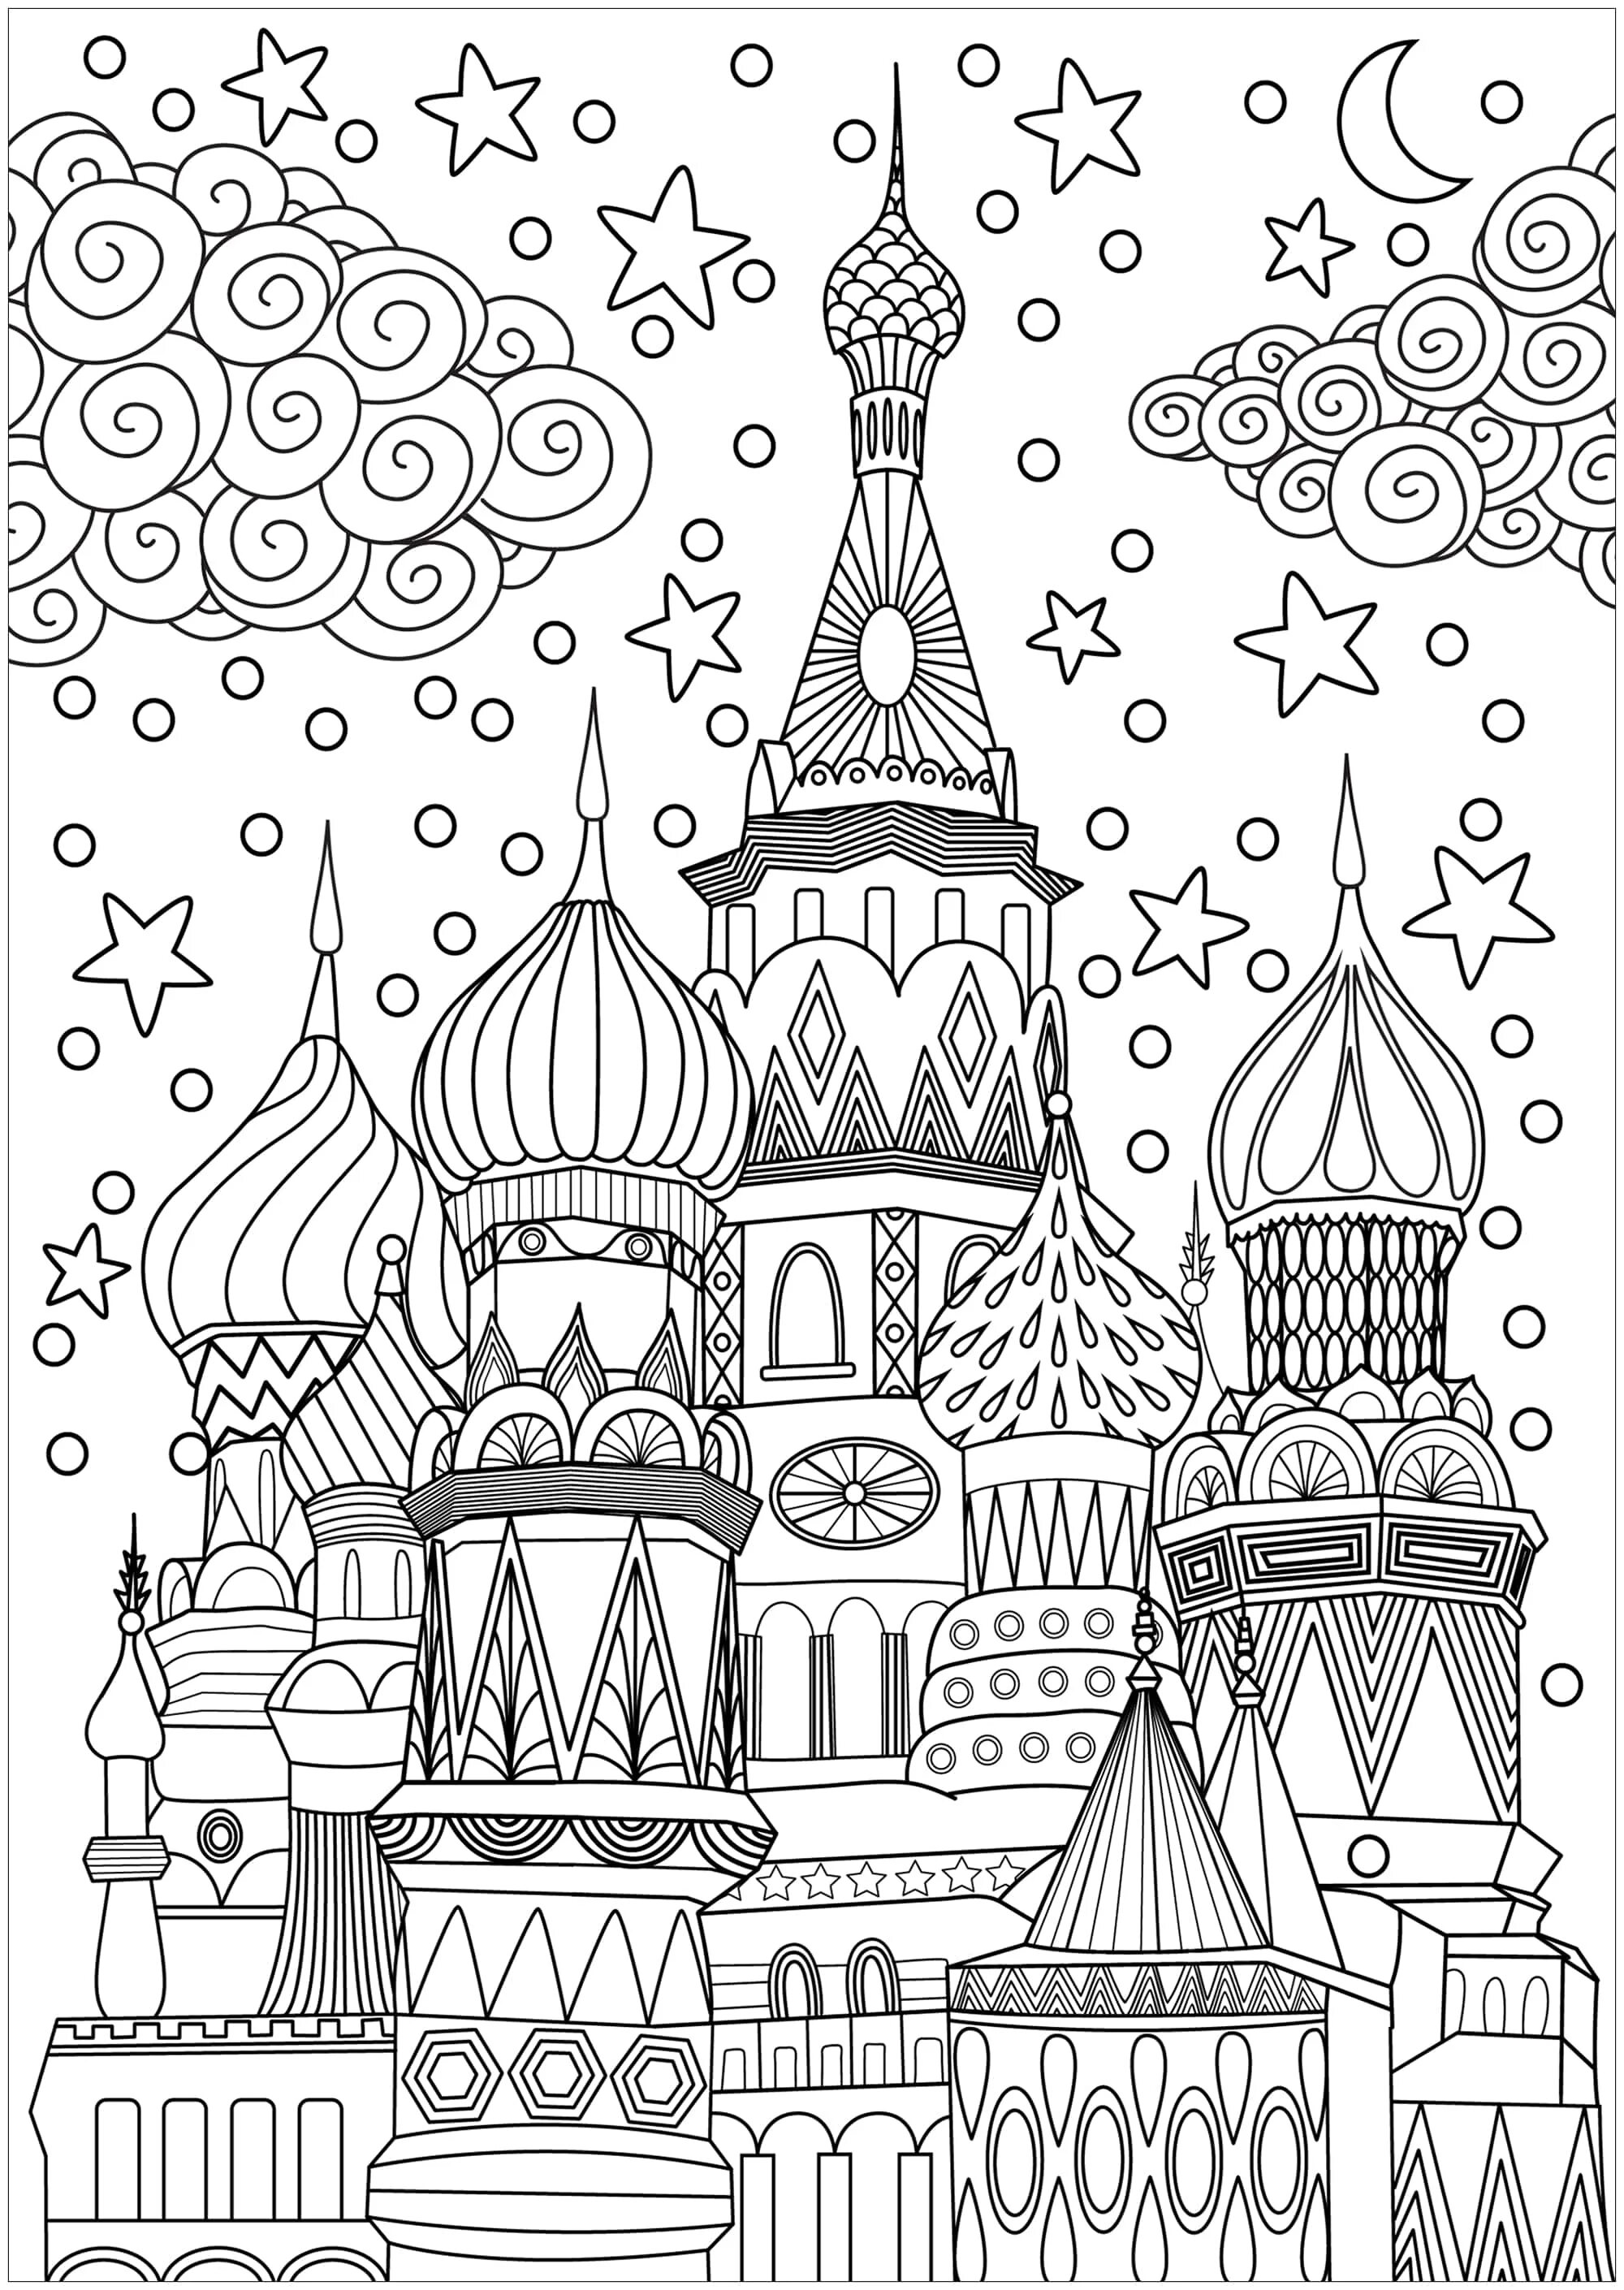 St. Basil's Cathedral #6